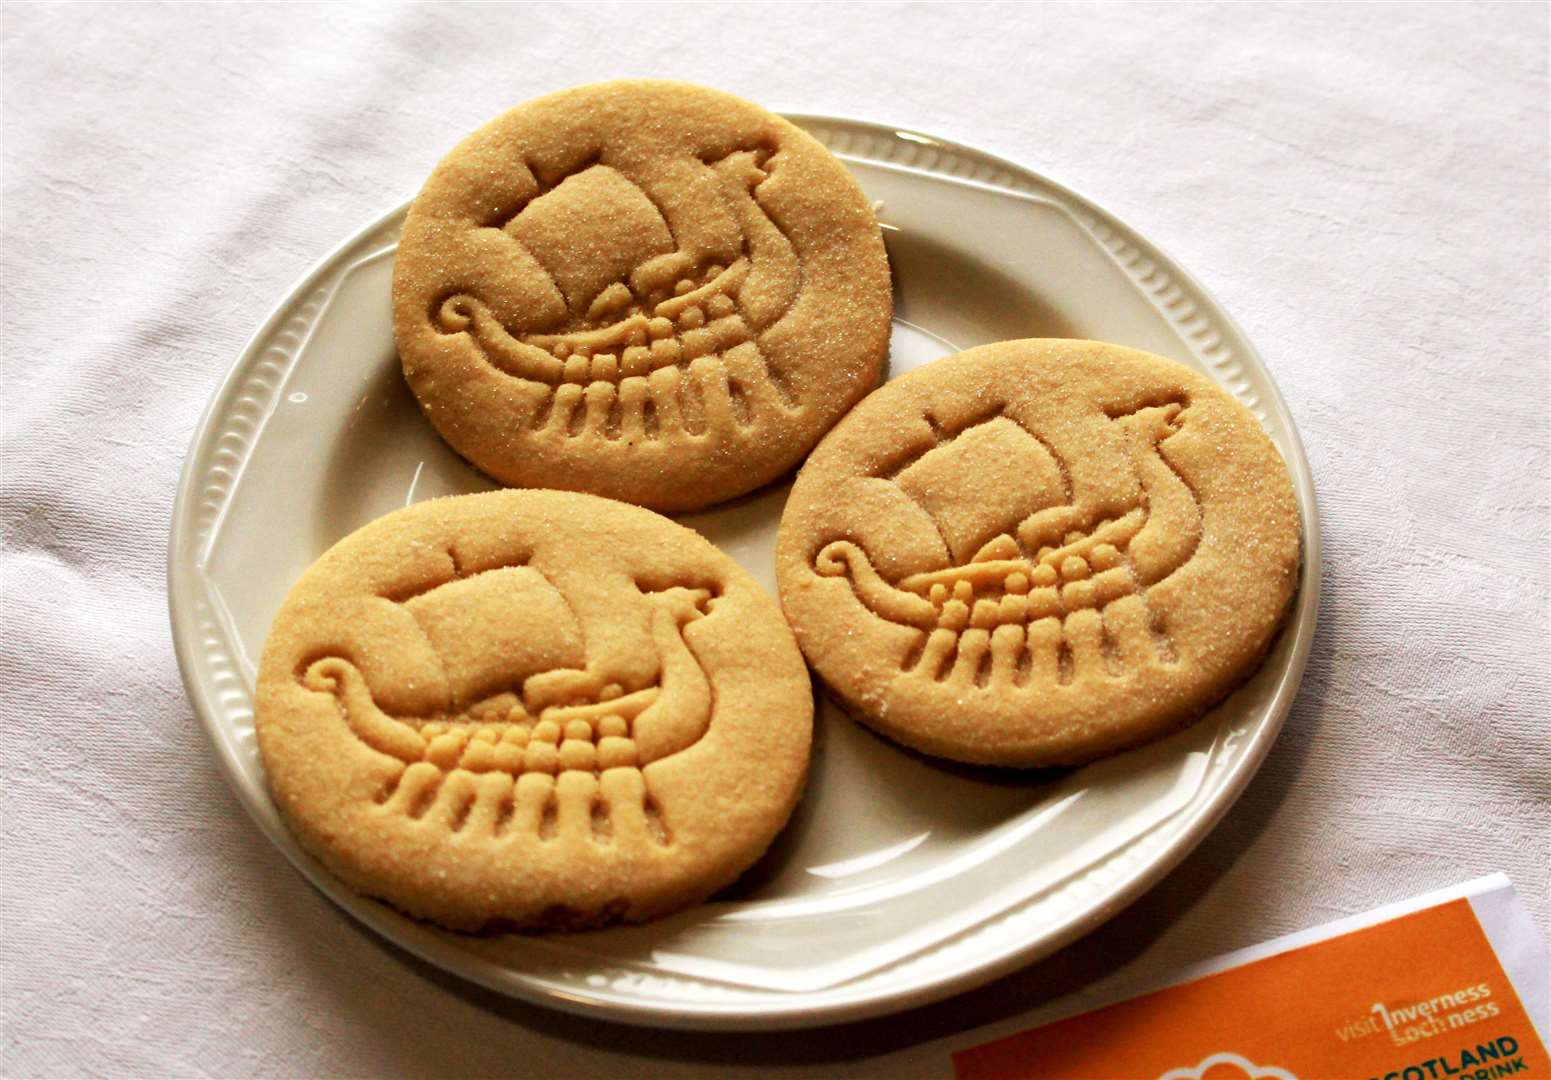 These shortbreads with a Viking longship design sailed through to the final.